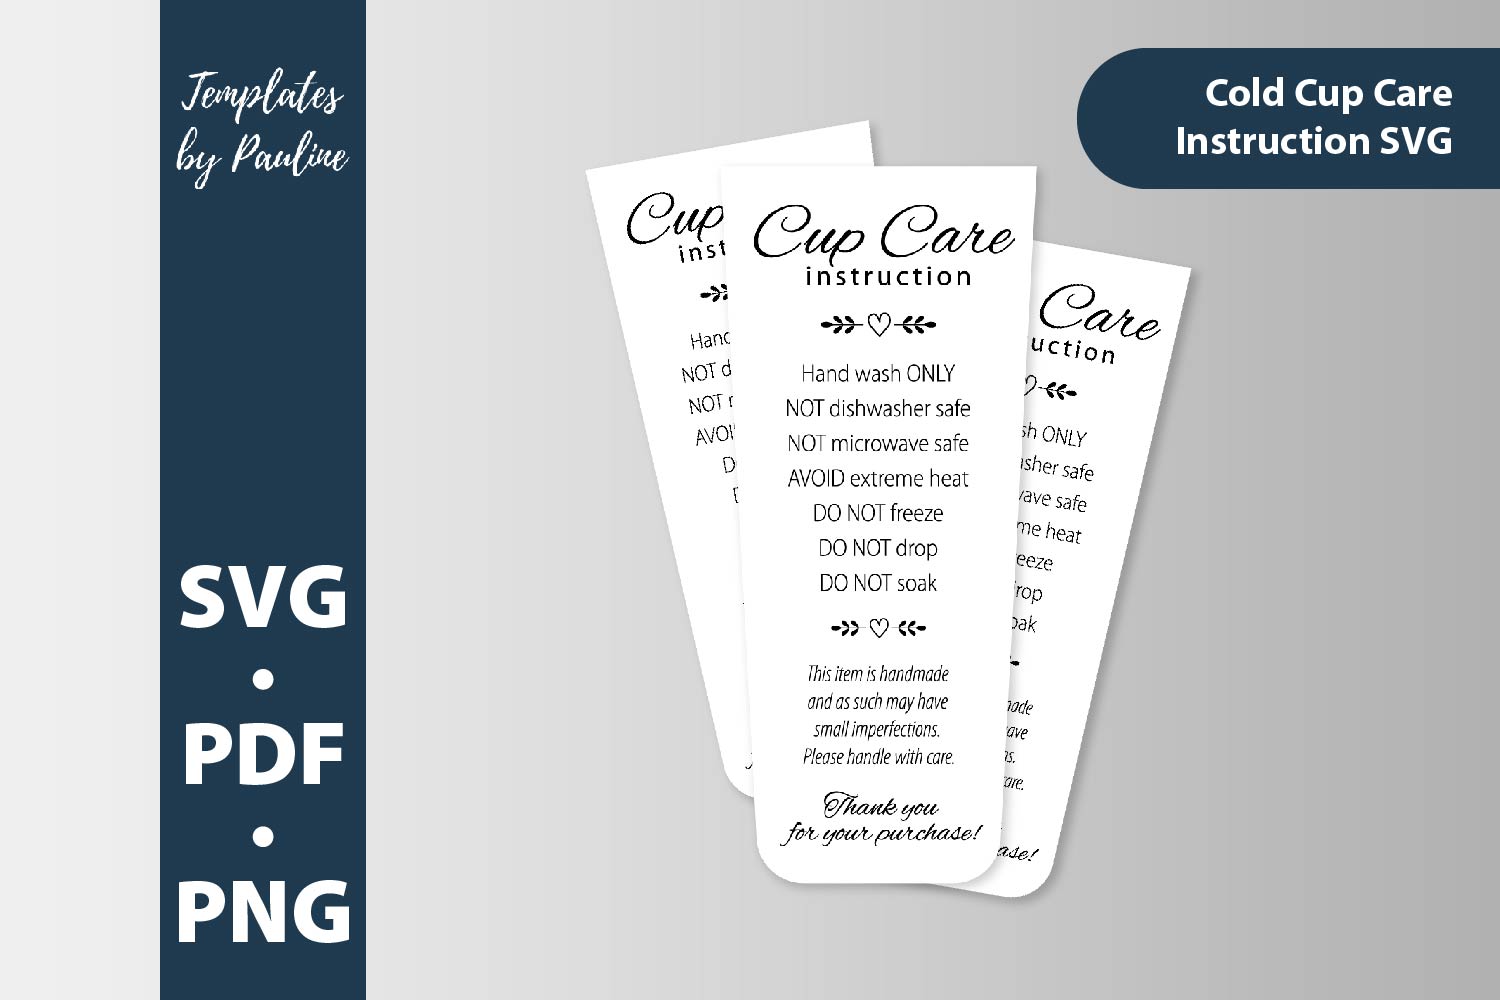 Skinny cup care instruction cards. Tumbler care card SVG sticker